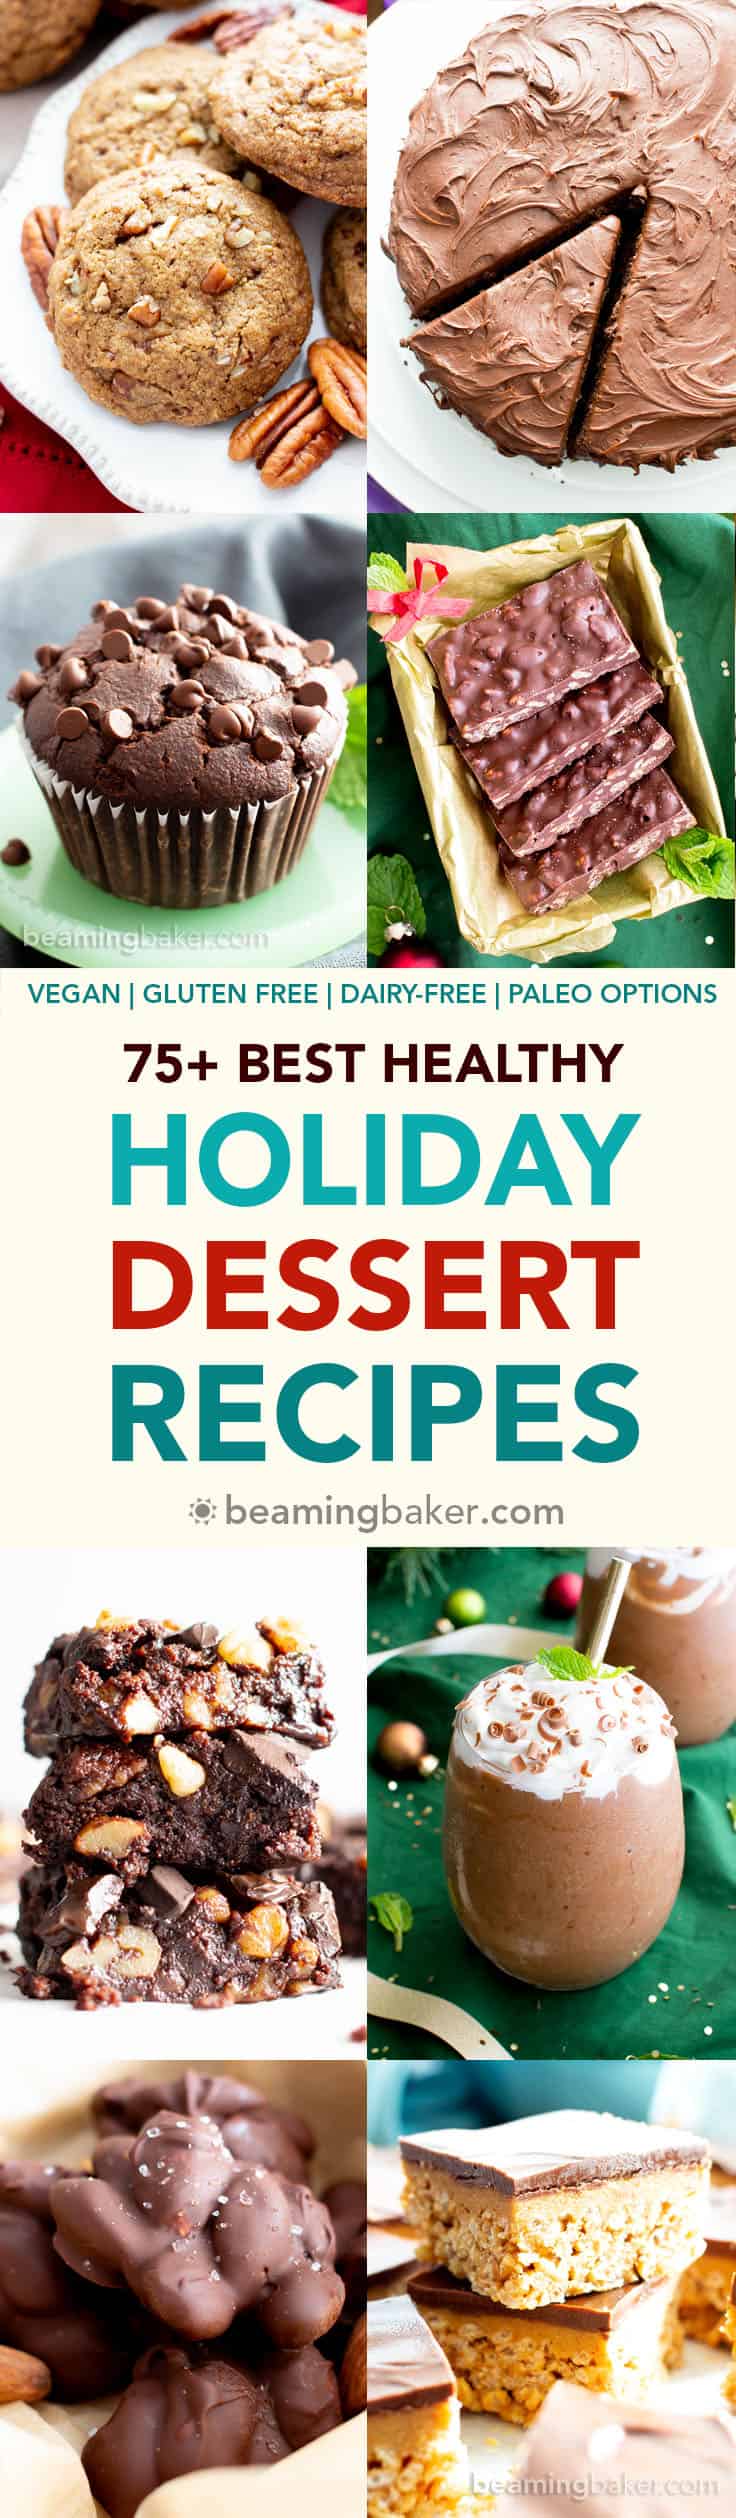 75+ Best Healthy Holiday Desserts (V, GF): an amazingly tasty collection of the best healthy gluten free vegan holiday desserts and treats! Featuring fun and festive recipes for cookies, candy, cupcakes, drinks and more! #Vegan #GlutenFree #DairyFree #Cookies #Candy #Christmas #Desserts #Healthy #Paleo | Recipes on BeamingBaker.com